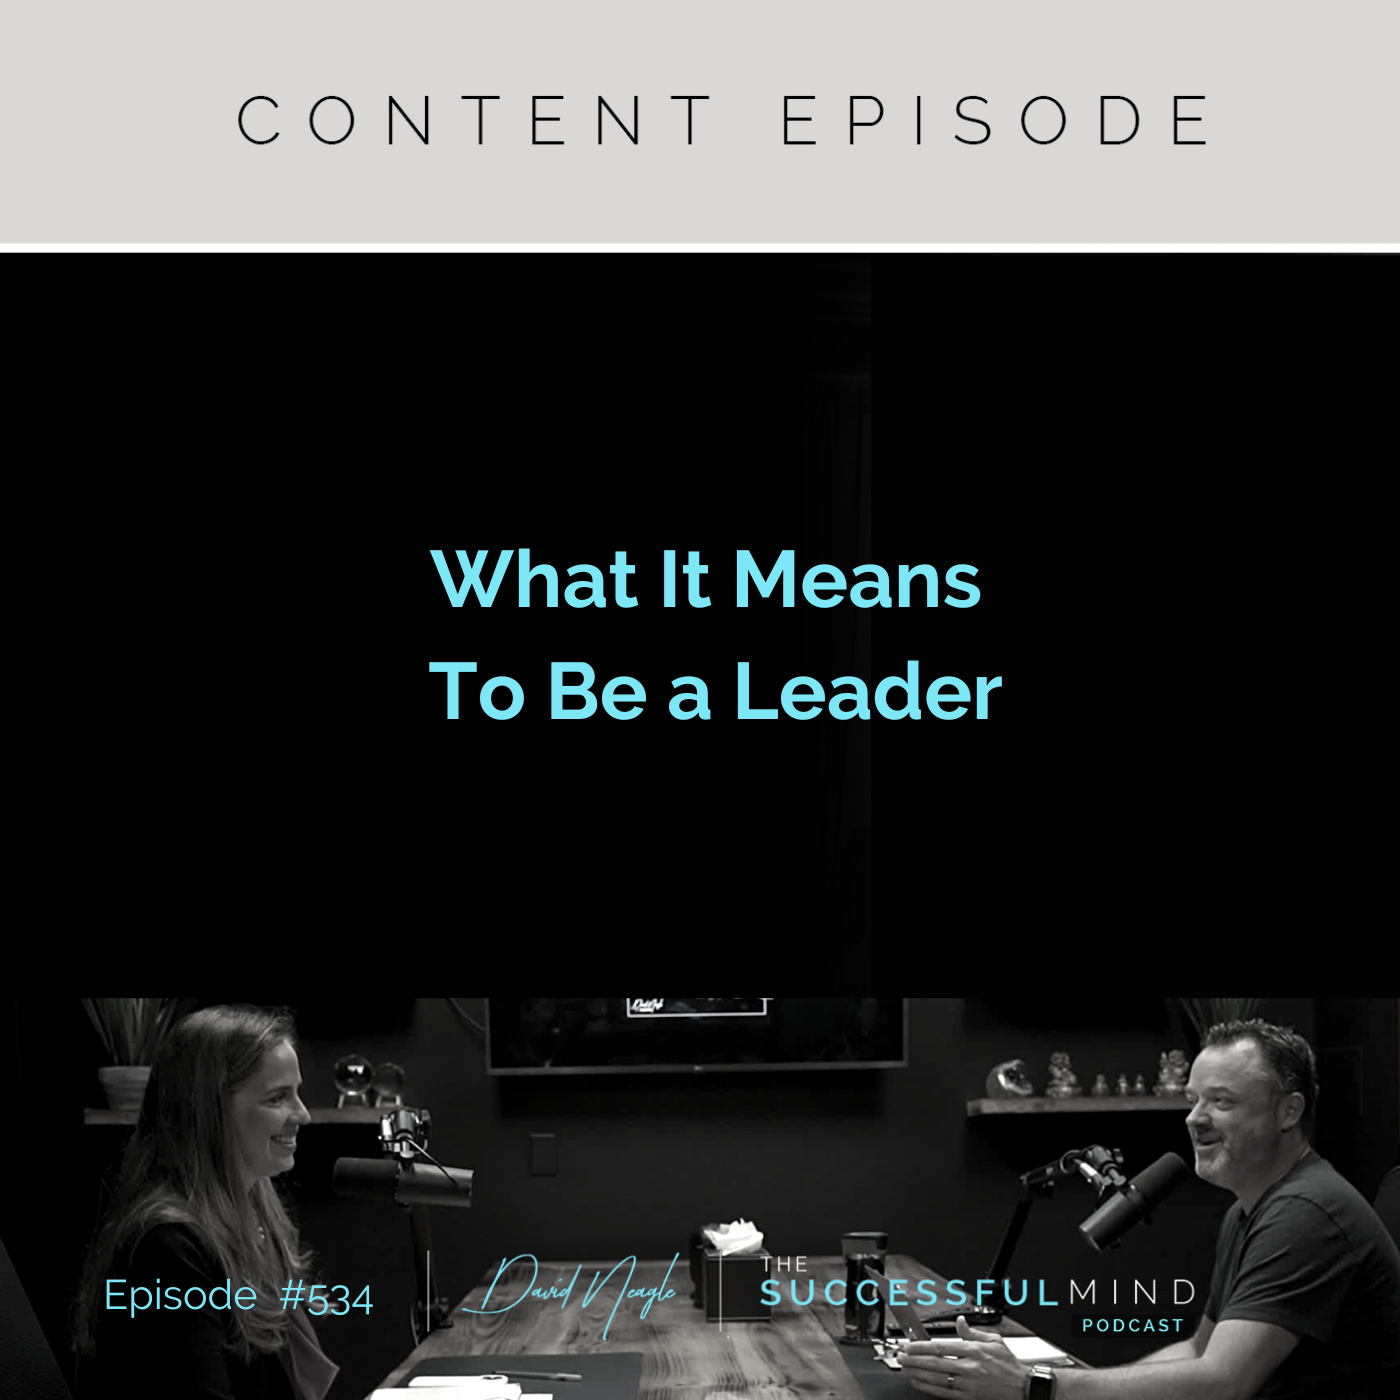 The Successful Mind Podcast – Episode 534 – What It Means To Be a Leader